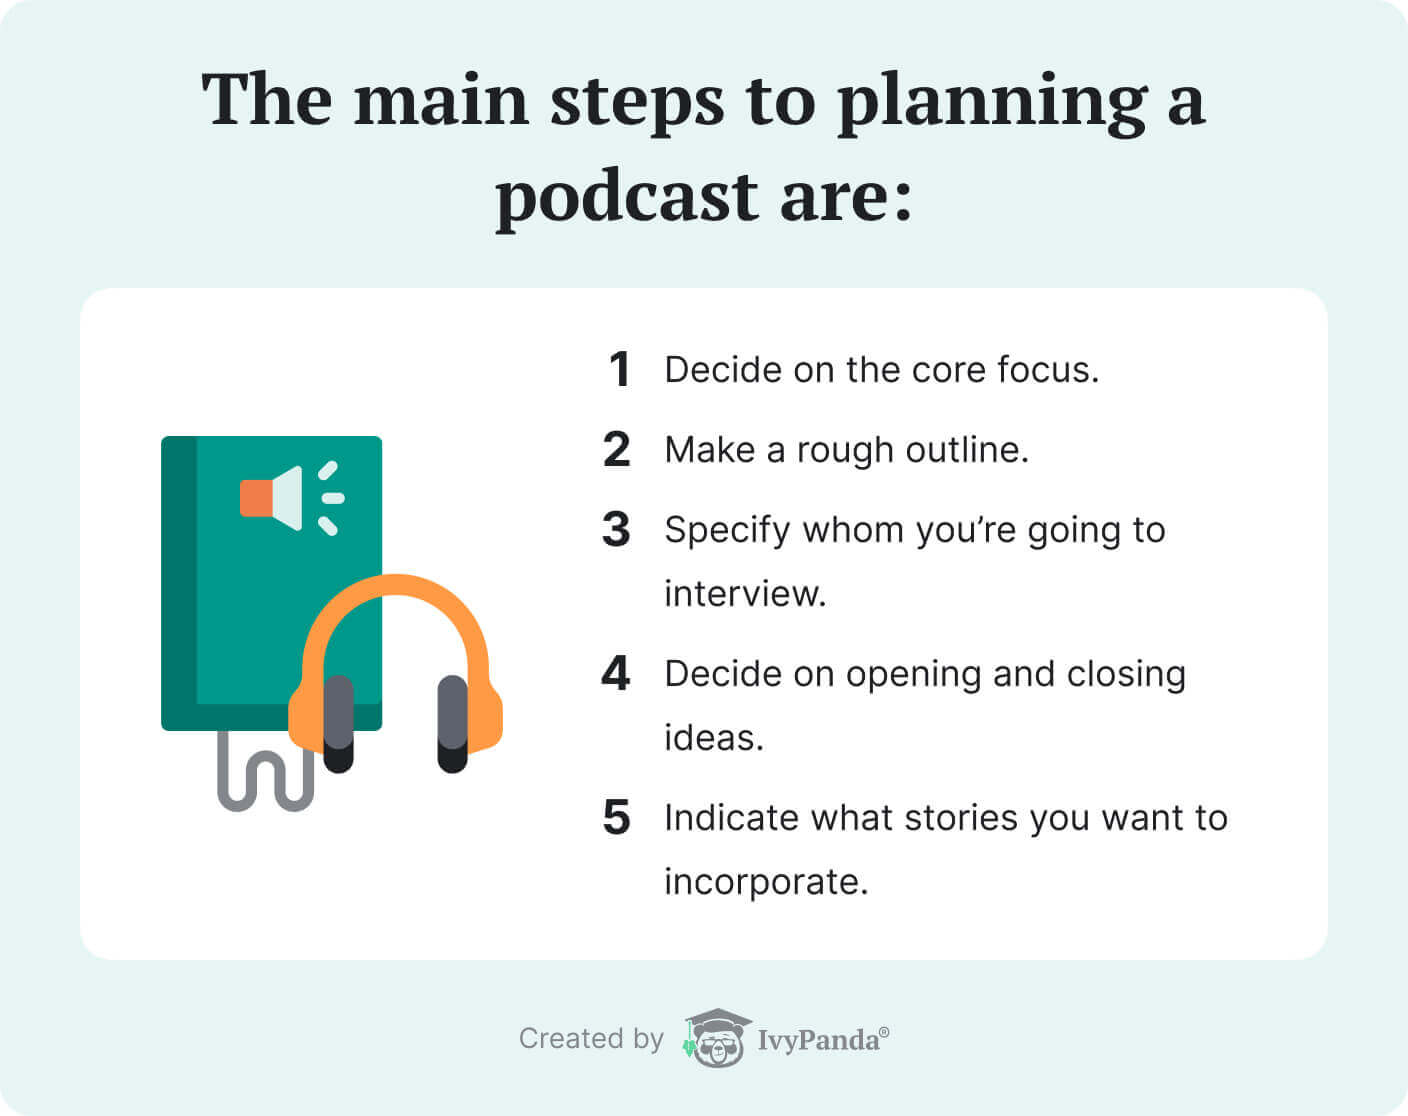 The picture presents the main steps to planning a podcast.